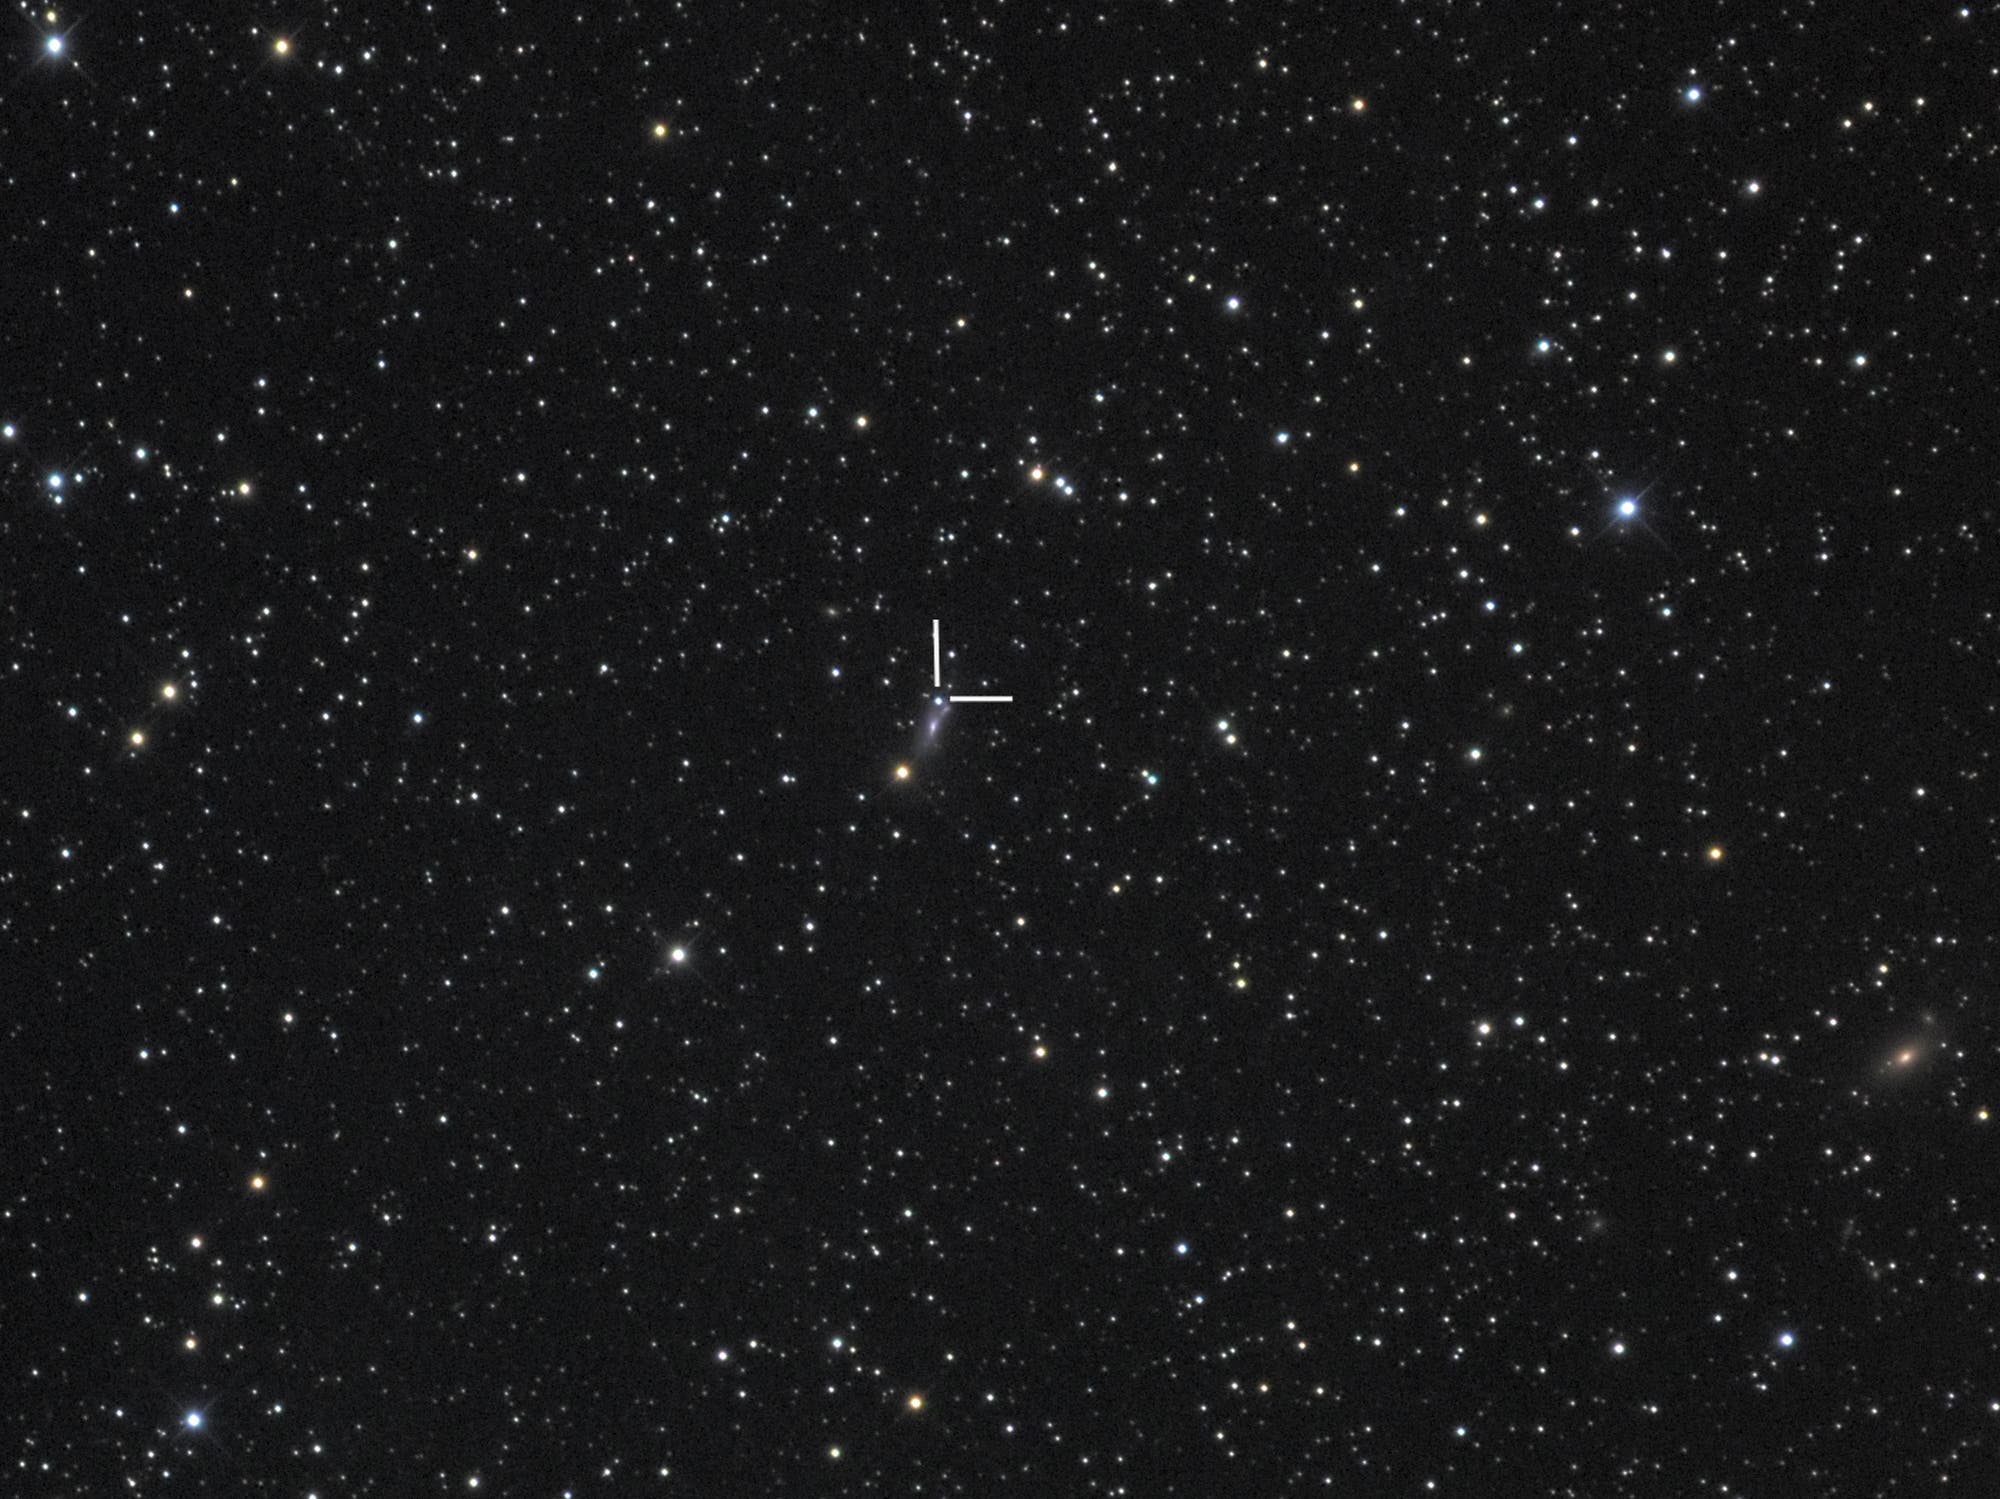 Supernova 2013dy in NGC 7250